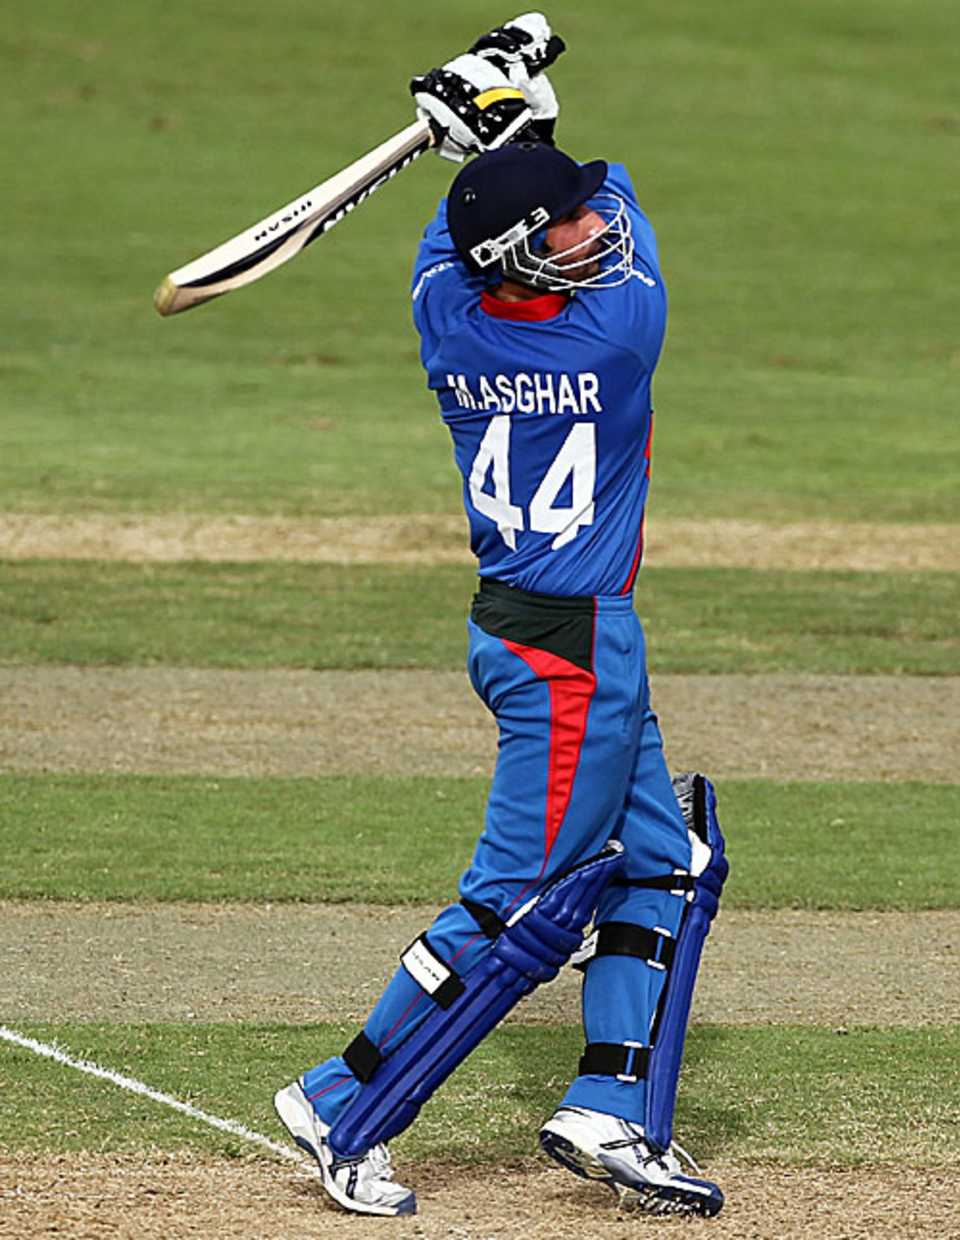 Asghar Stanikzai top scored for Afghanistan with an unbeaten 39